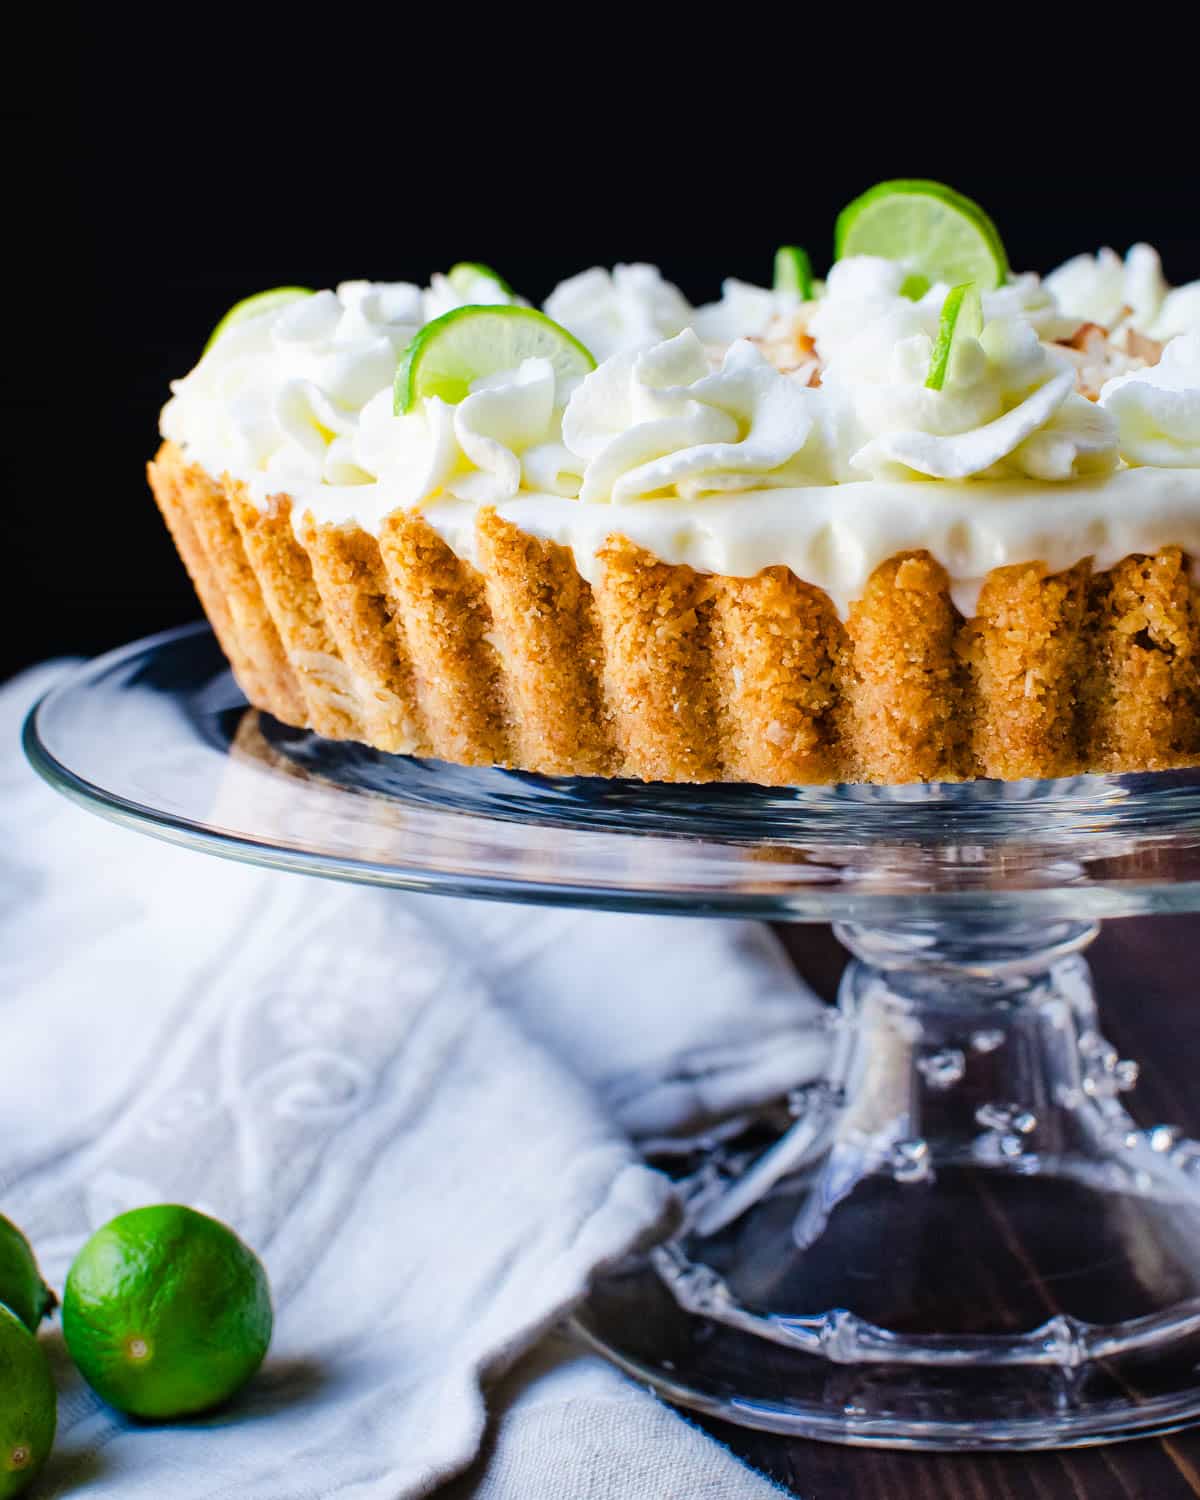 Serving the key lime mousse tart on a cake plate.